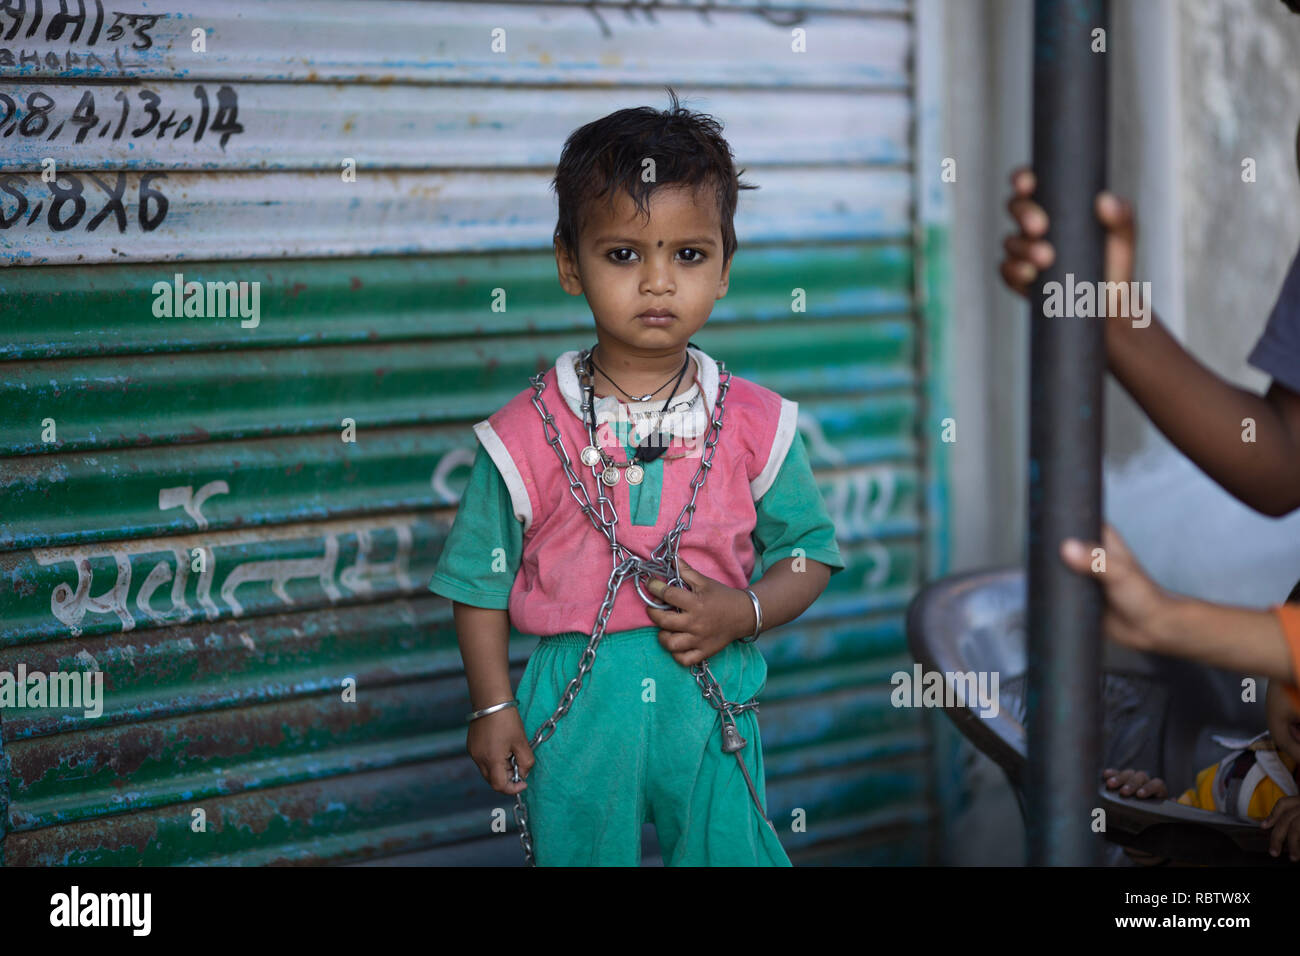 A local child seen posing for a photo near the derelict Union Carbide factory, Bhopal. The Bhopal Gas Disaster was a gas leak incident on the night of 2-3 December 1984 at the Union Carbide plant in Bhopal. Over 500,000 people were exposed to the toxic methyl isocyanate (MIC) gas as they slept. The final death toll is estimated to be between 15,000 and 20,000. Stock Photo